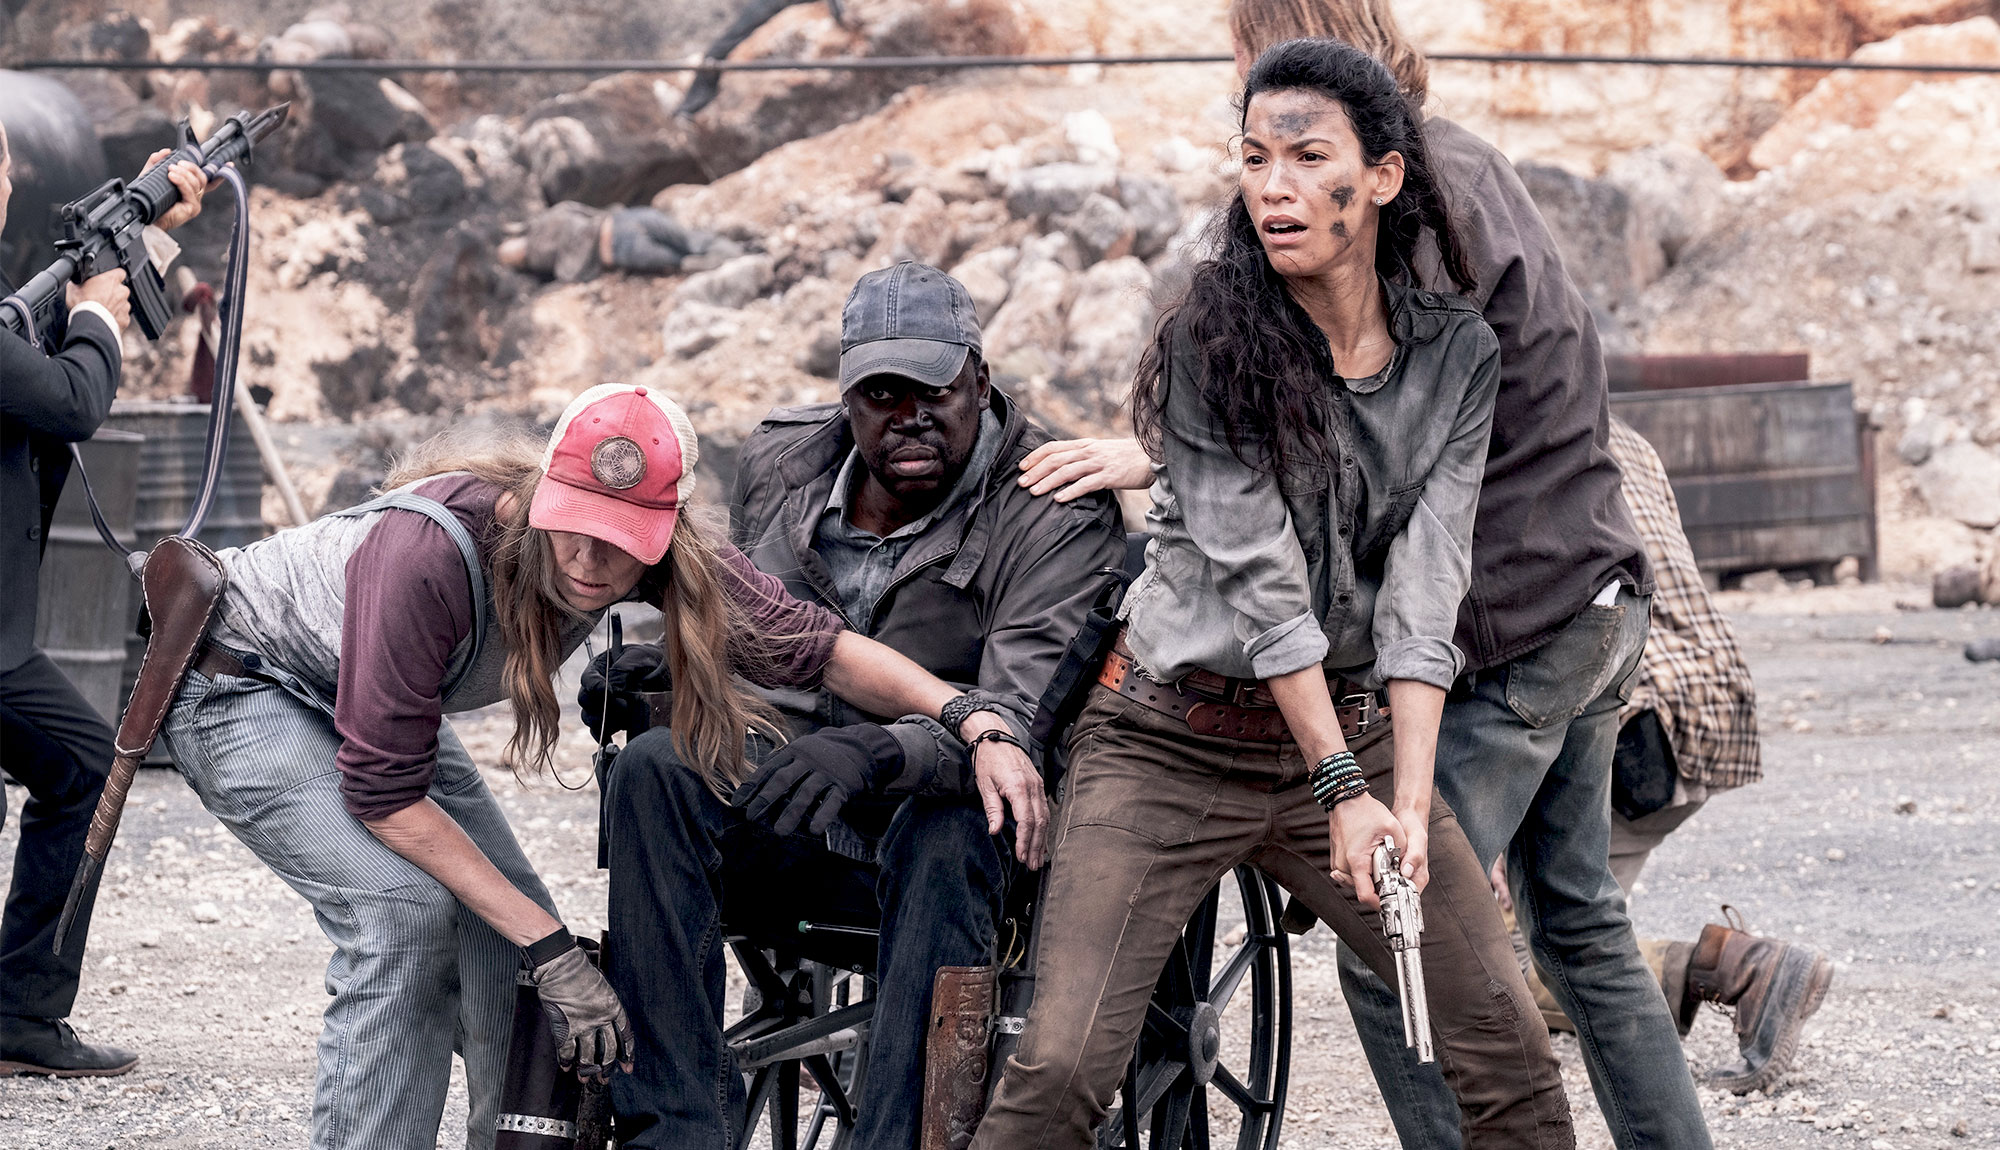 The Best Images From Fear the Walking Dead Episode 513